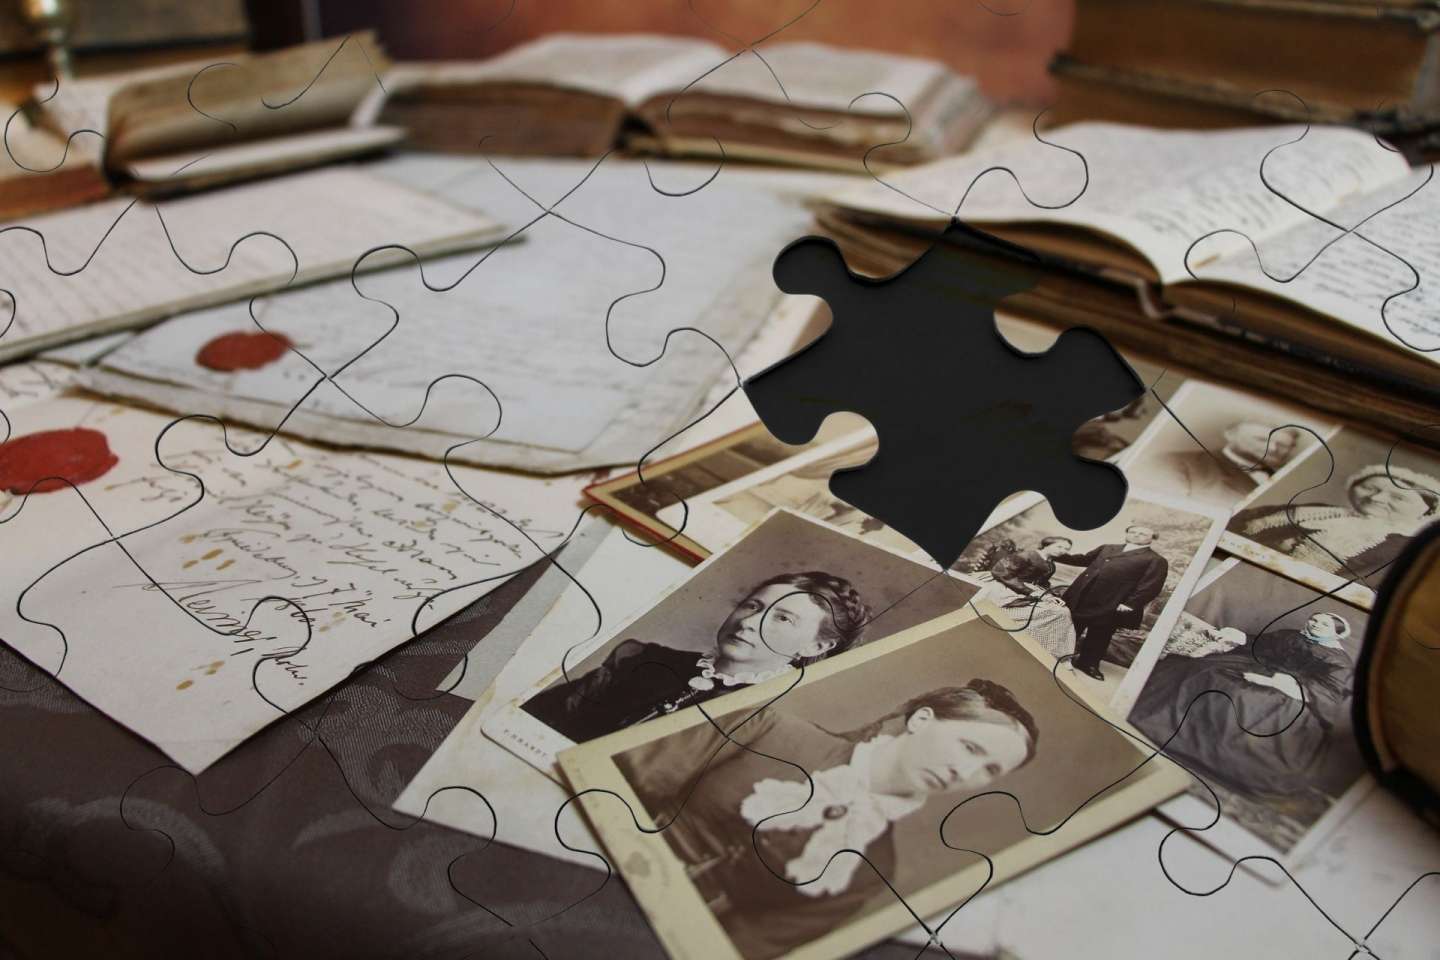 jigsaw puzzle design of table covered by old handwritten letters with red wax seals, open books, and rows of vintage photographs of ladies and couples